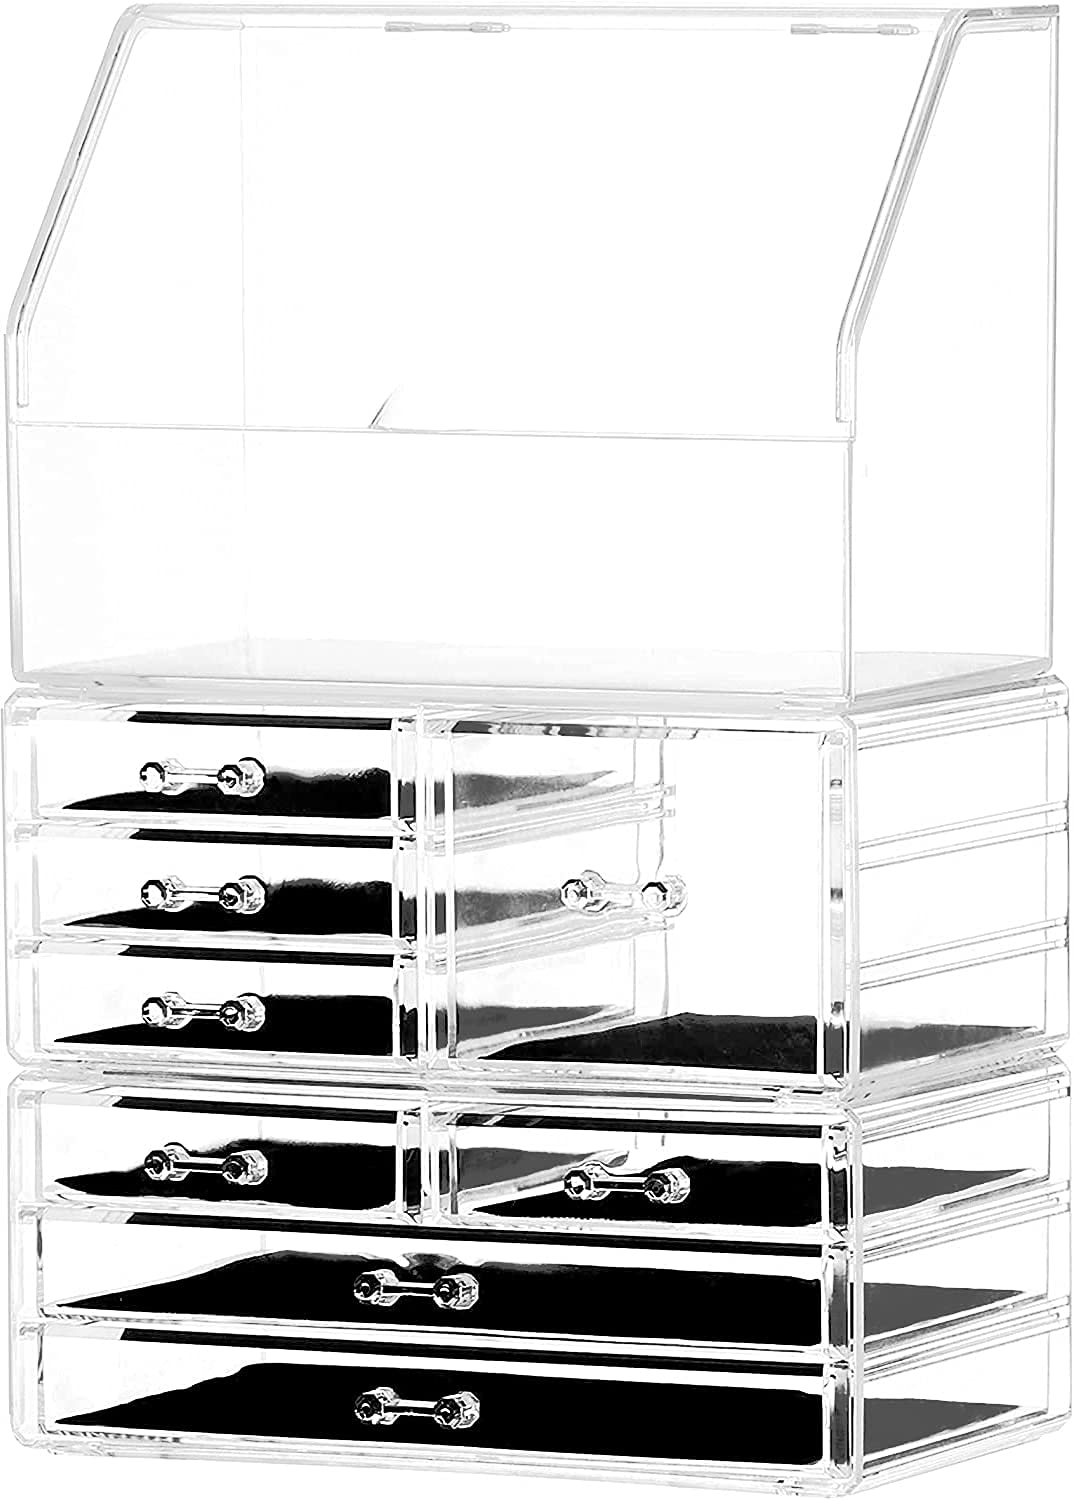 Cq acrylic Makeup Organizer And Storage White Skin Care Cosmetic Display  Case With 3 Clear Drawers Make up Stands For Jewelry Hair Accessories